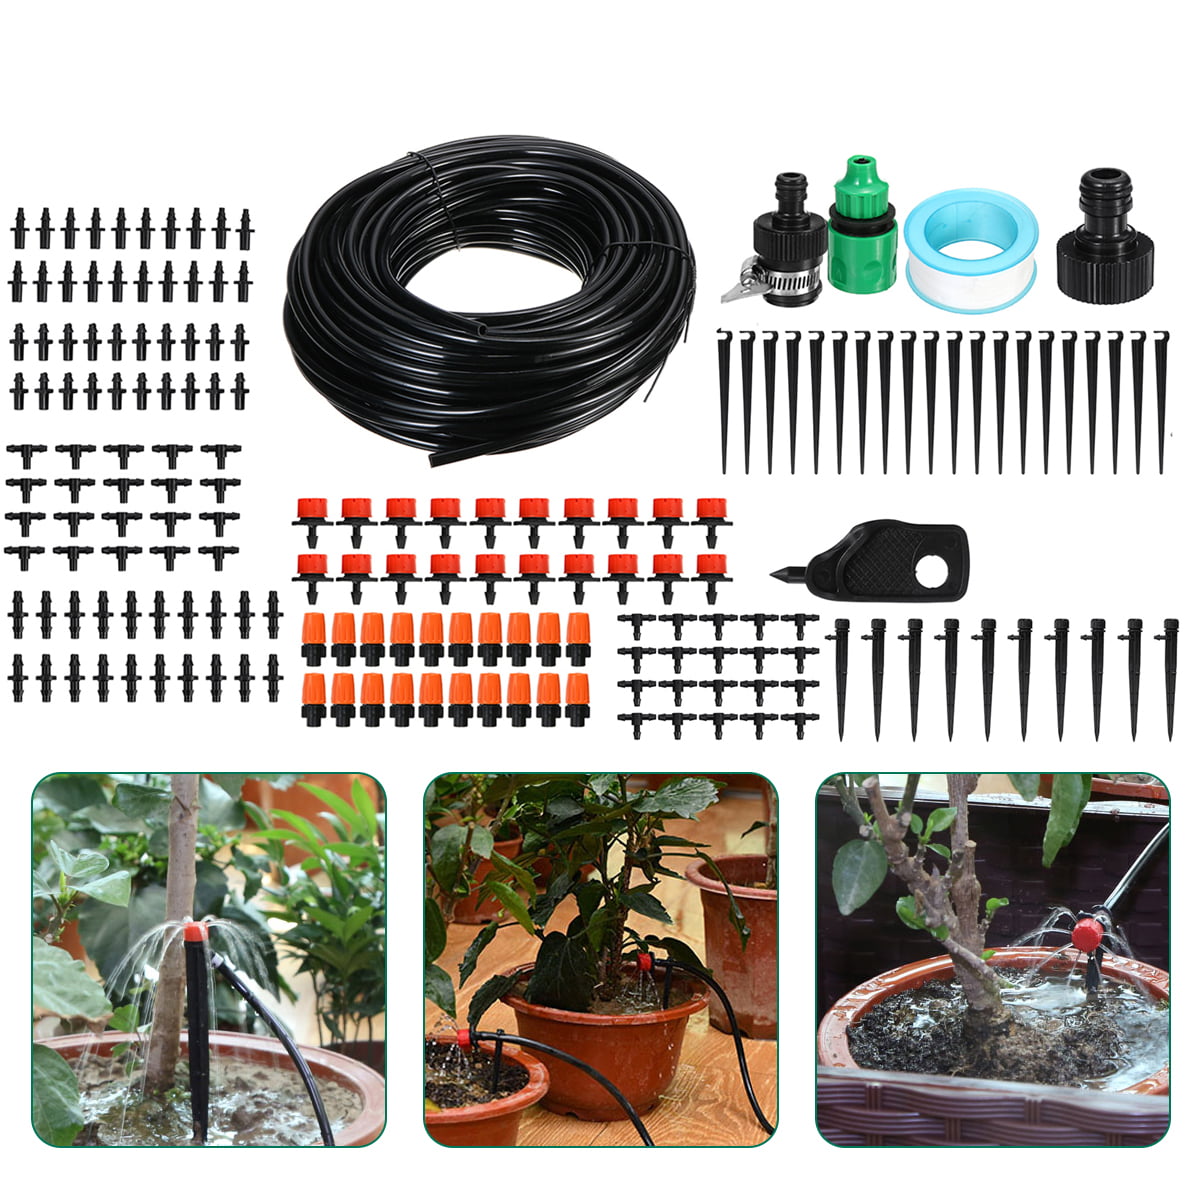 131FT Automatic Irrigation System Hose Drip Sprinklers Garden Lawn Watering Kit